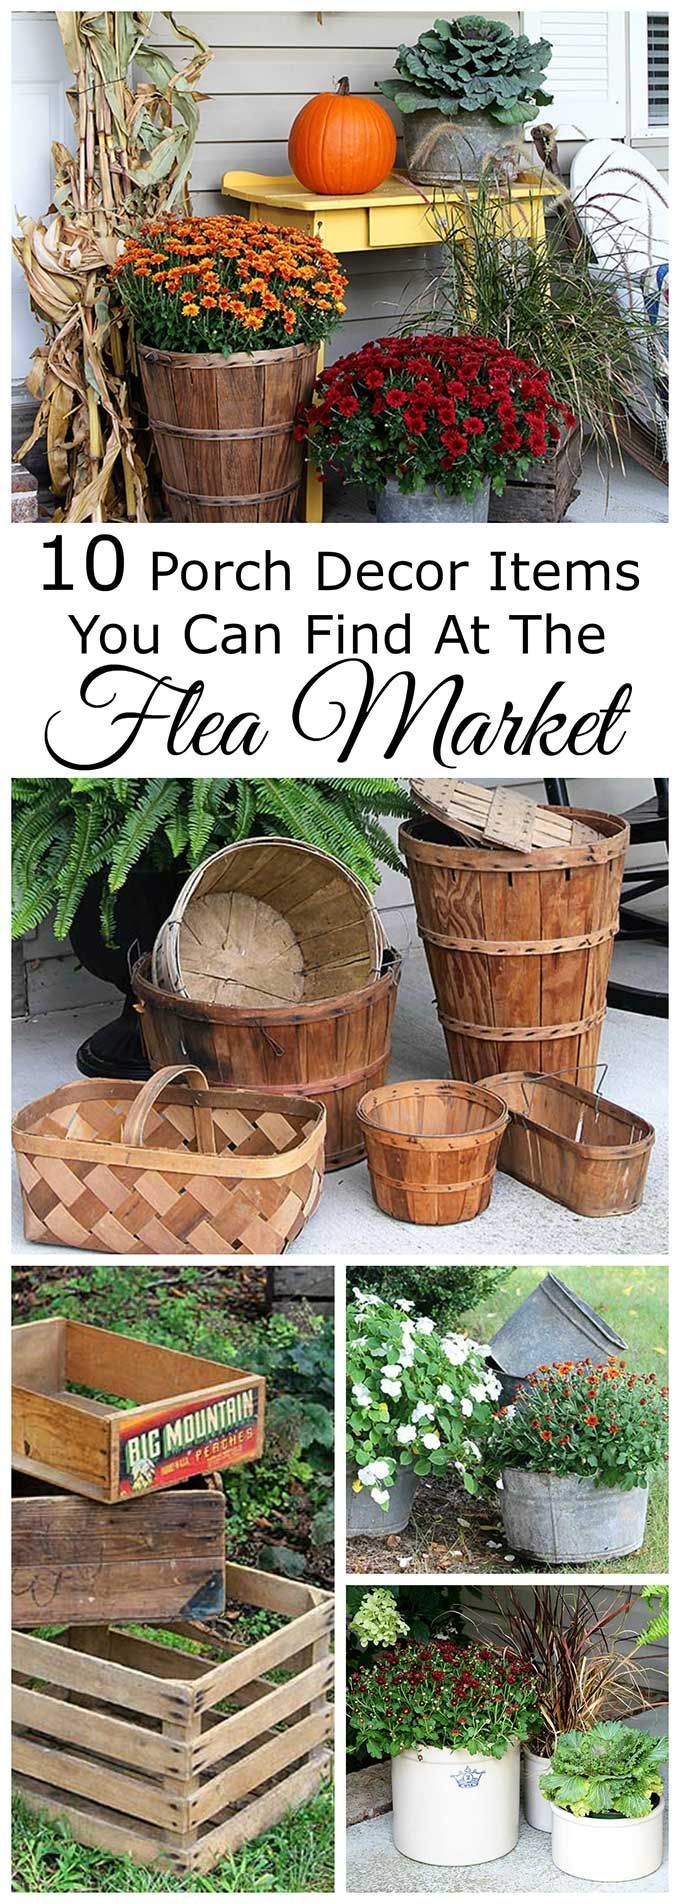 Some of the best fall porch decor can be found at flea markets, festivals, fairs...